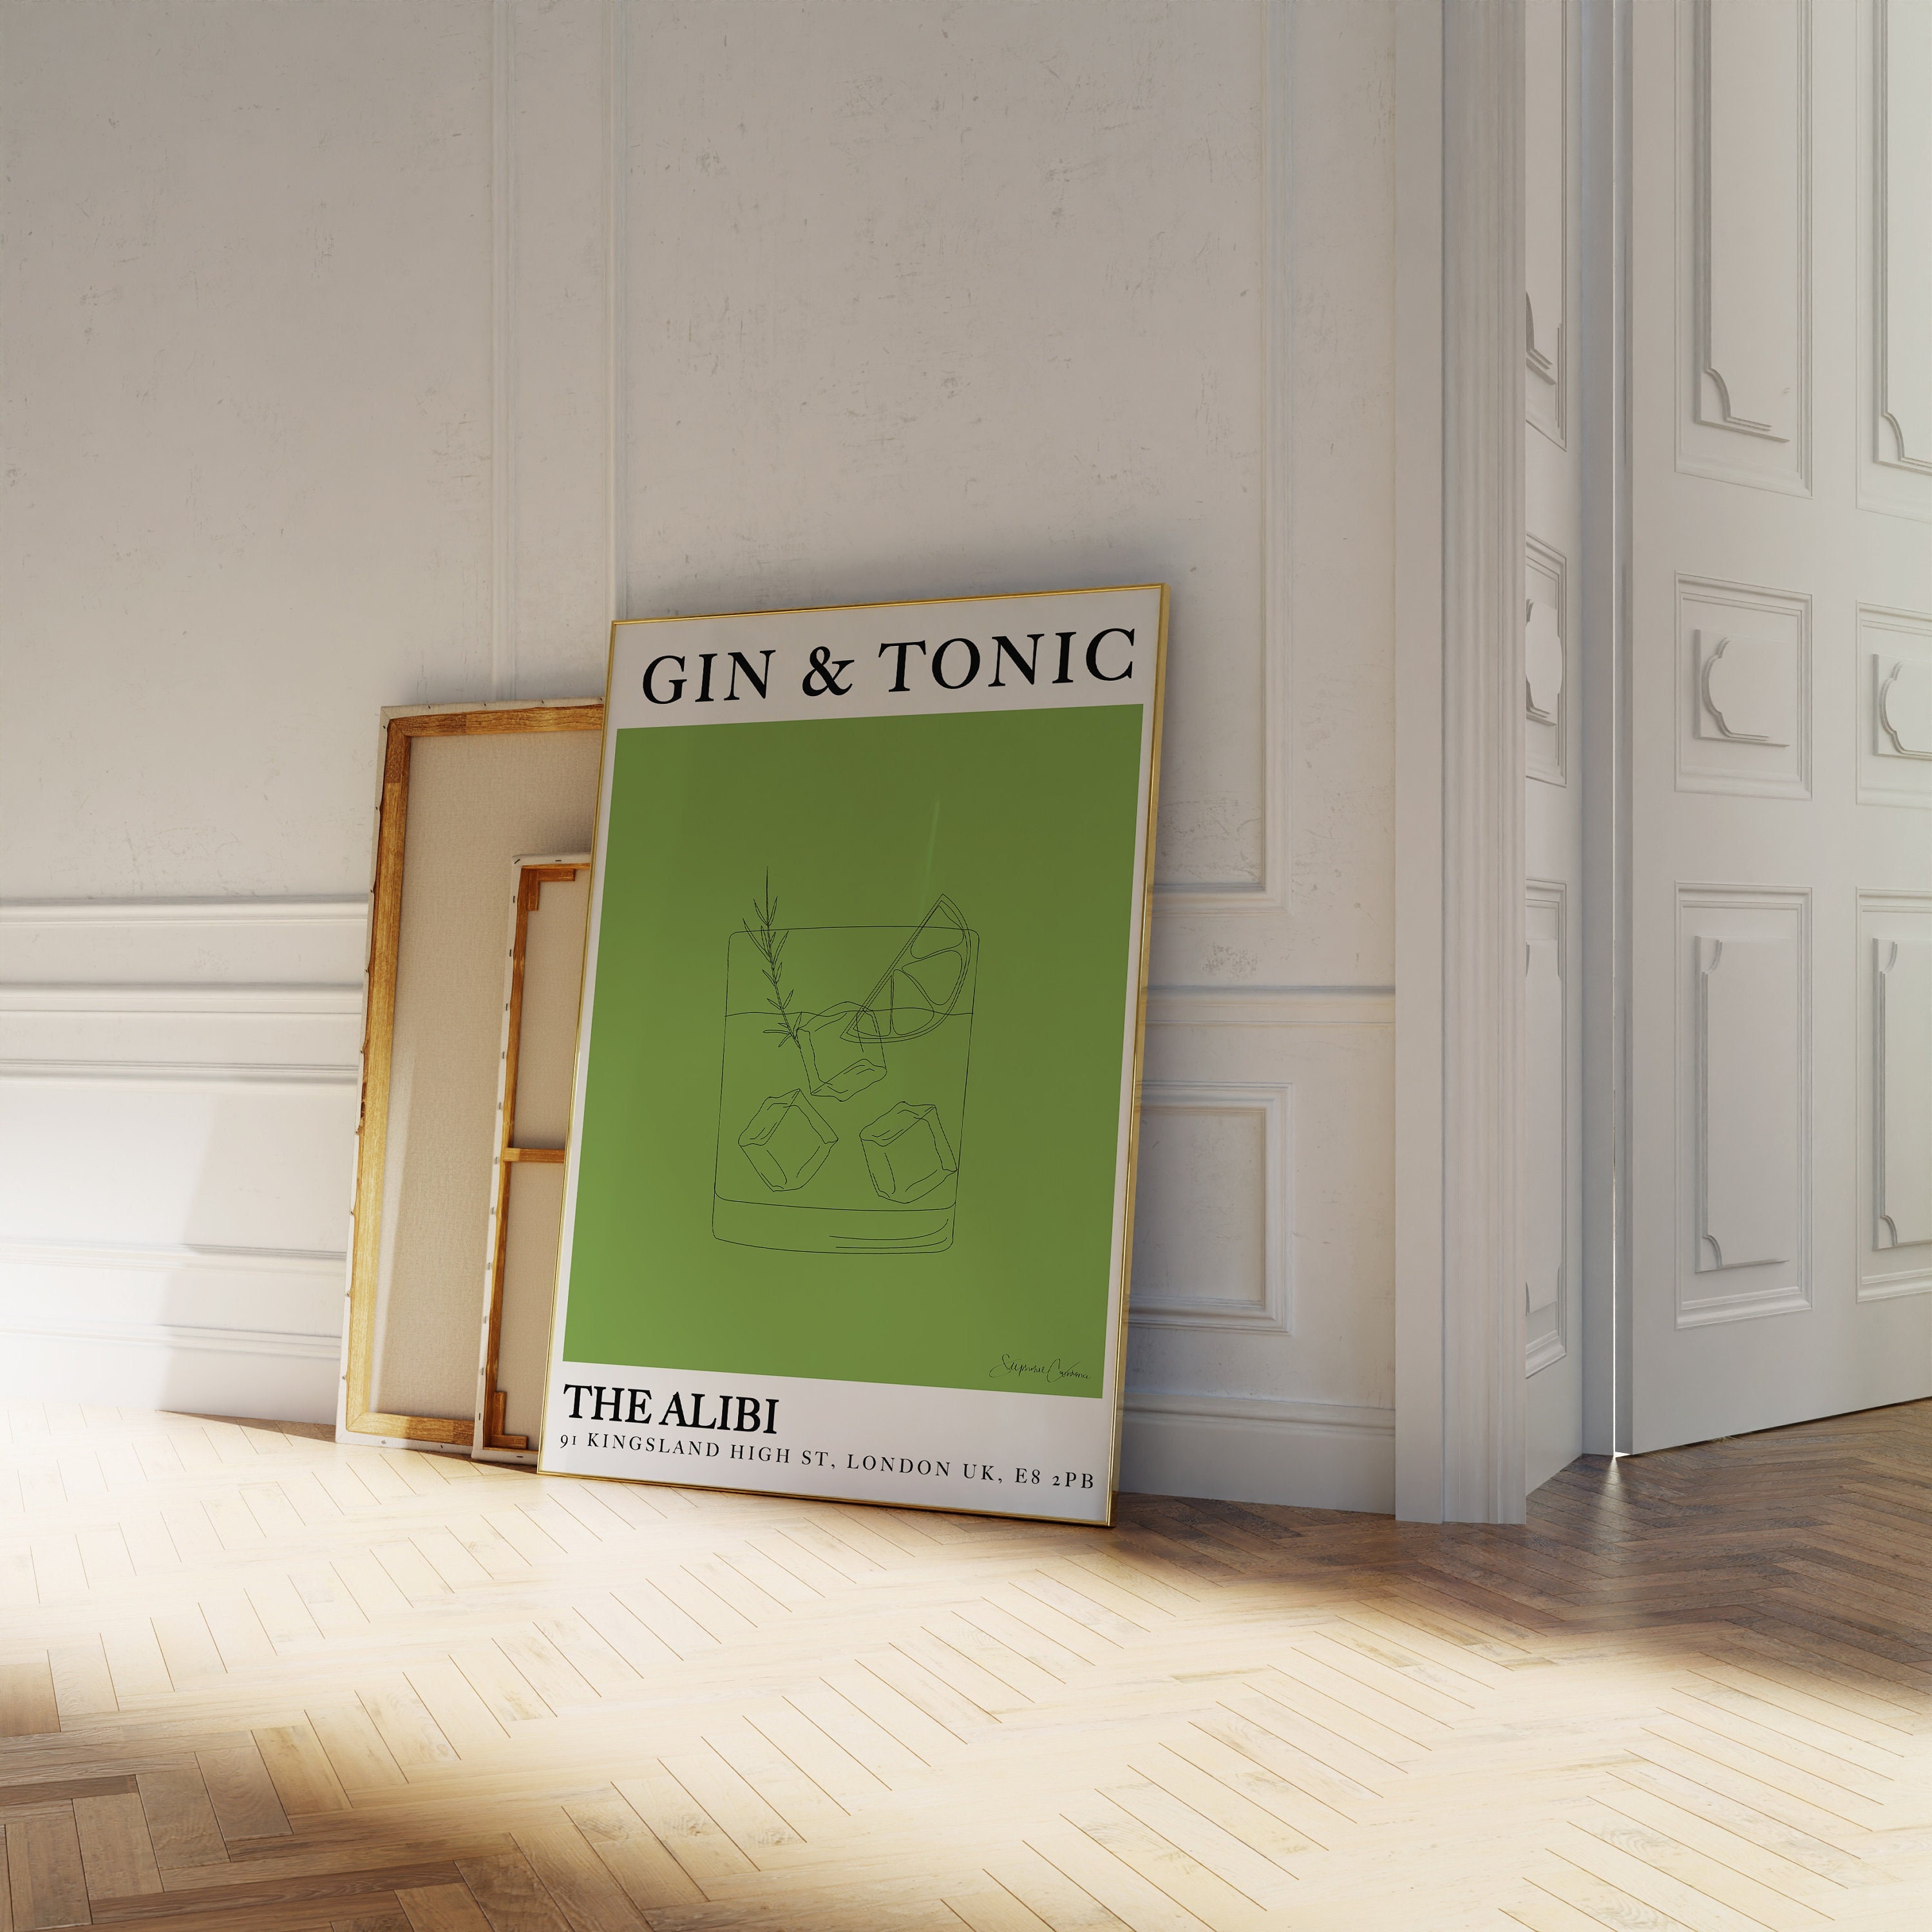 Gin and Tonic Poster - Etsy